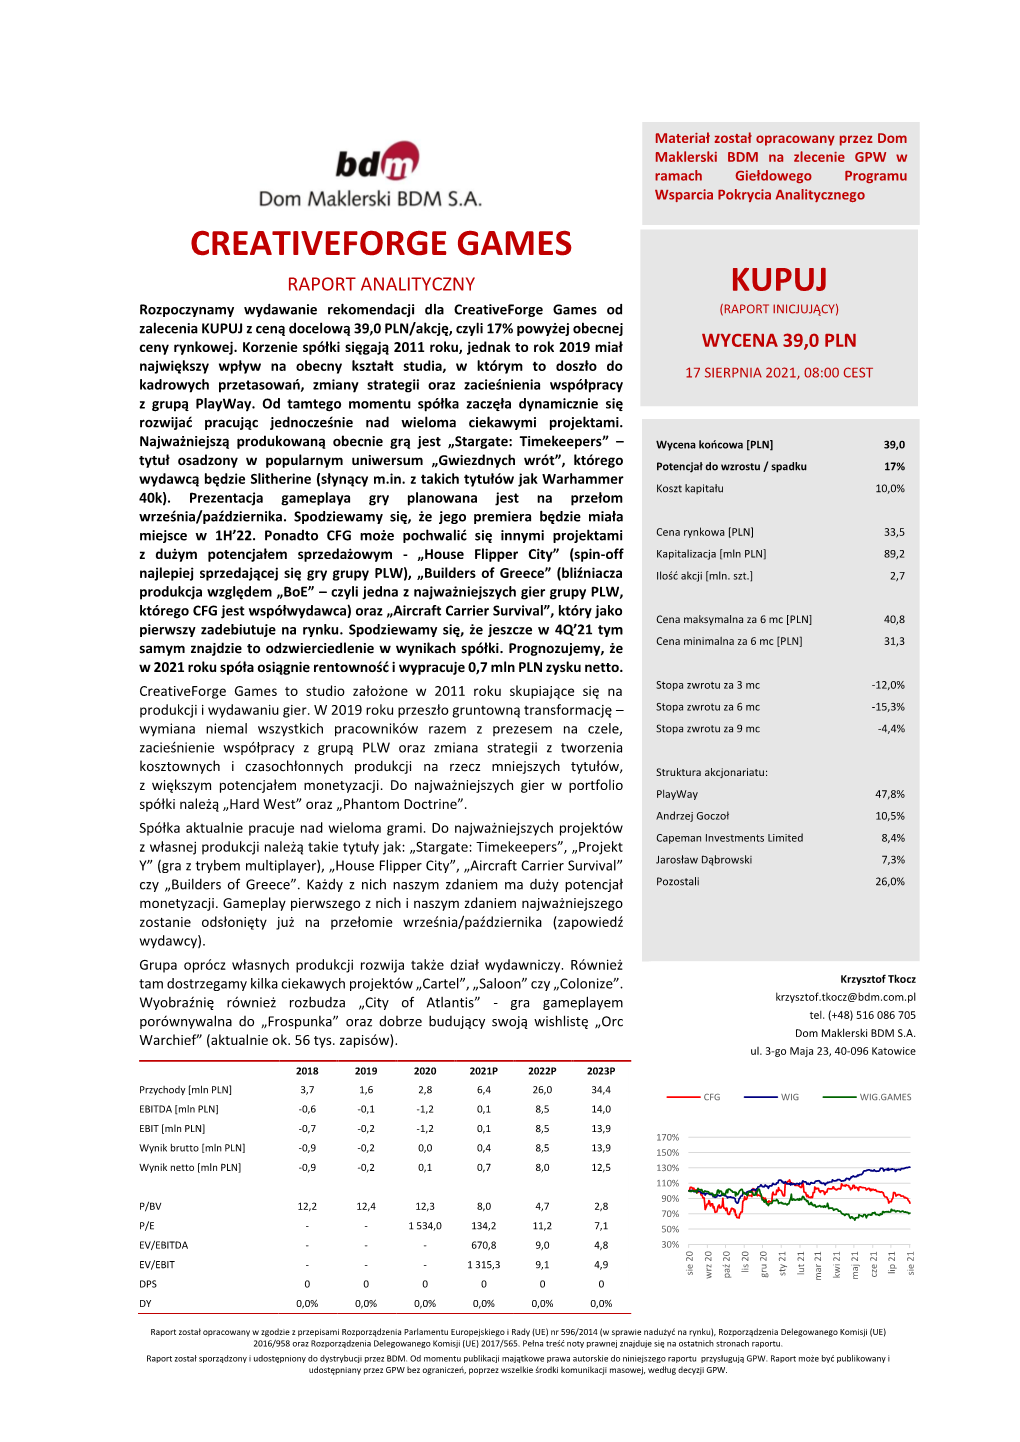 Creativeforge Games